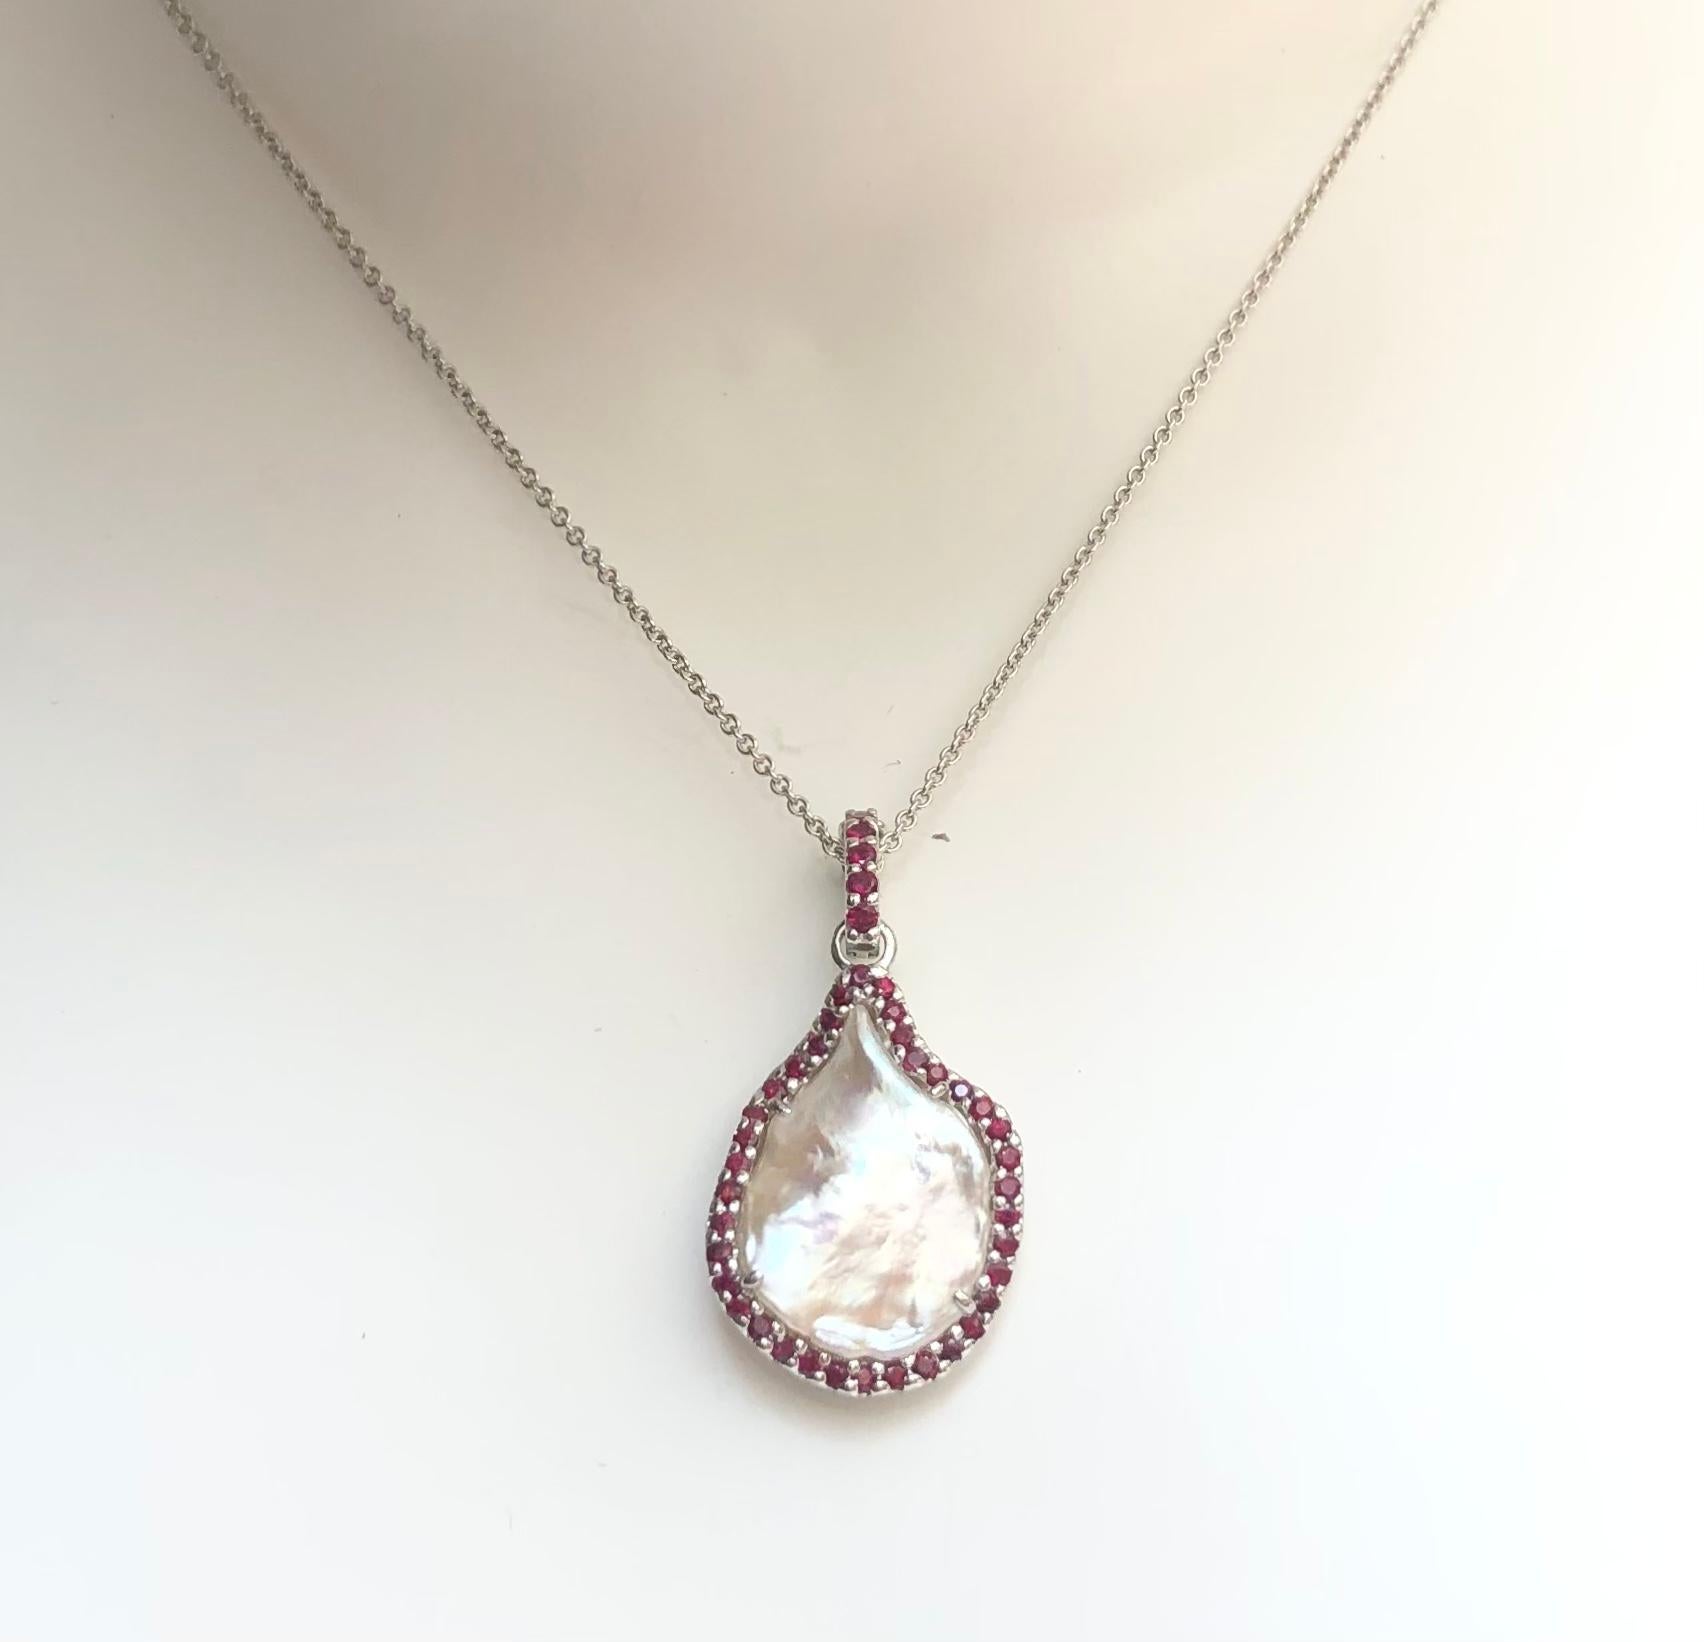 Fresh Water Pearl with Ruby 0.76 carat Pendant set in 18 Karat White Gold Settings
(chain not included)

Width:  1.8 cm 
Length: 3.4 cm
Total Weight: 5.55 grams

